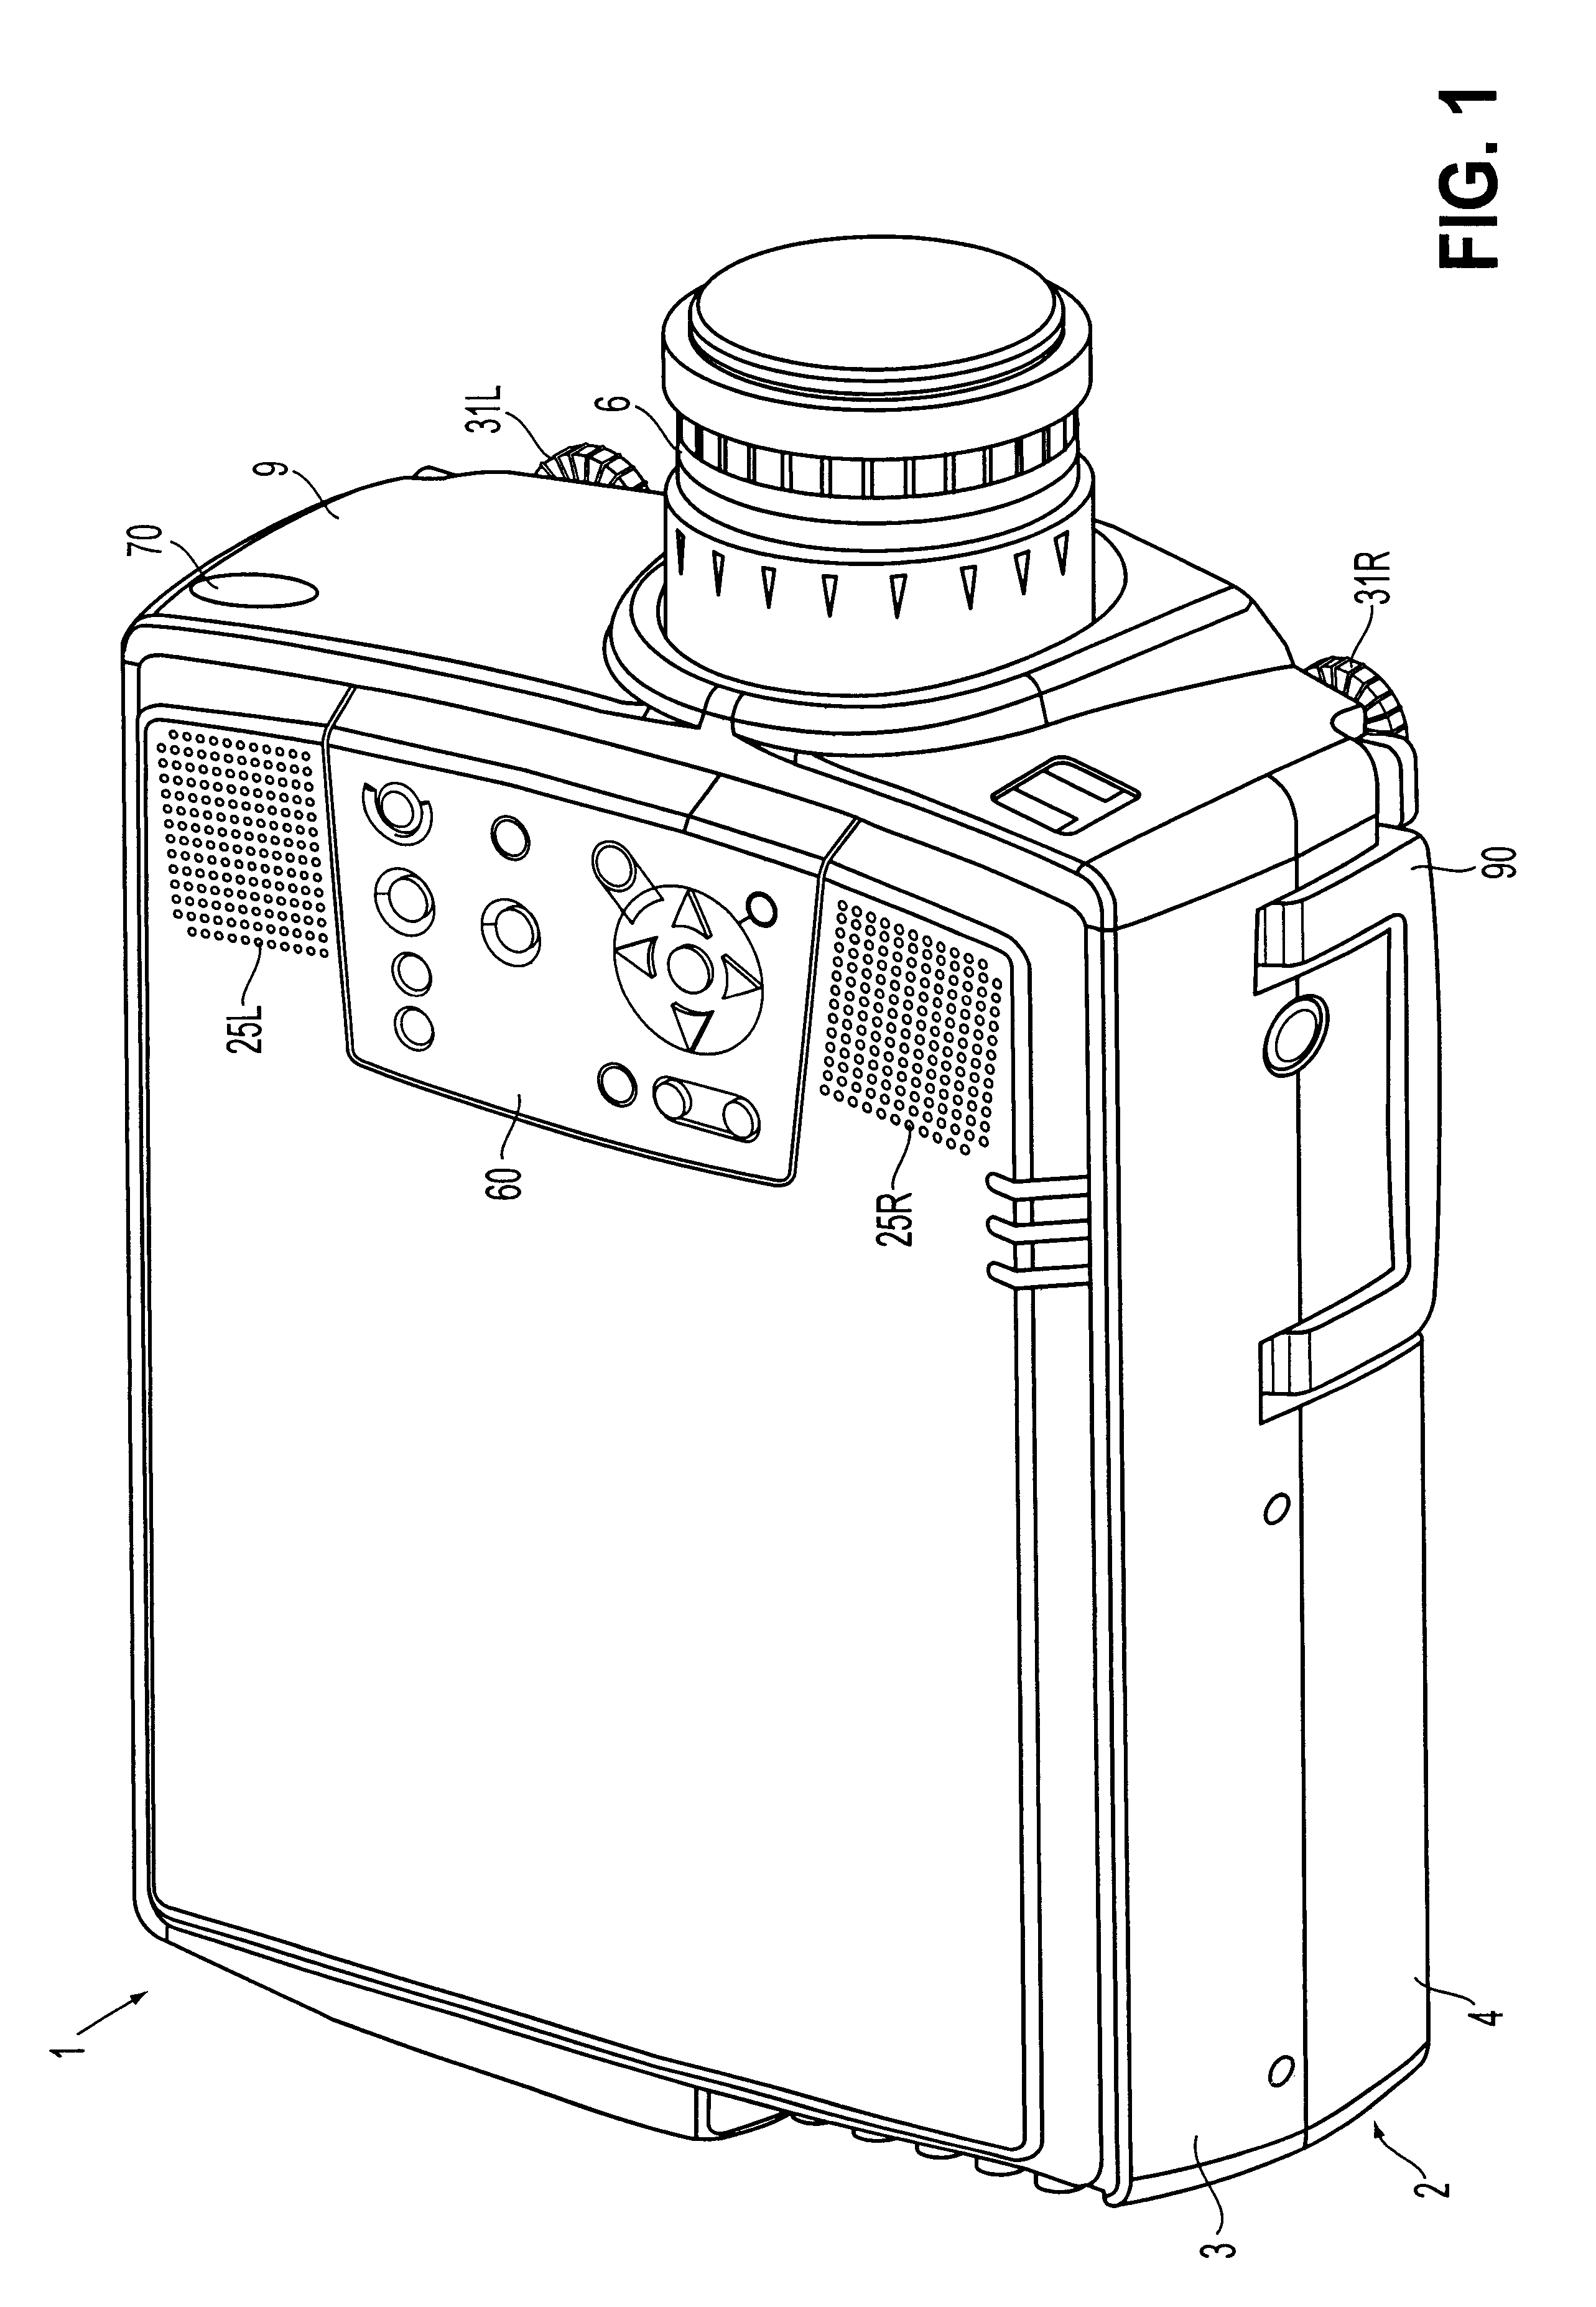 Optical projector with image enlarging and projecting capability and heat insulating and cooling means